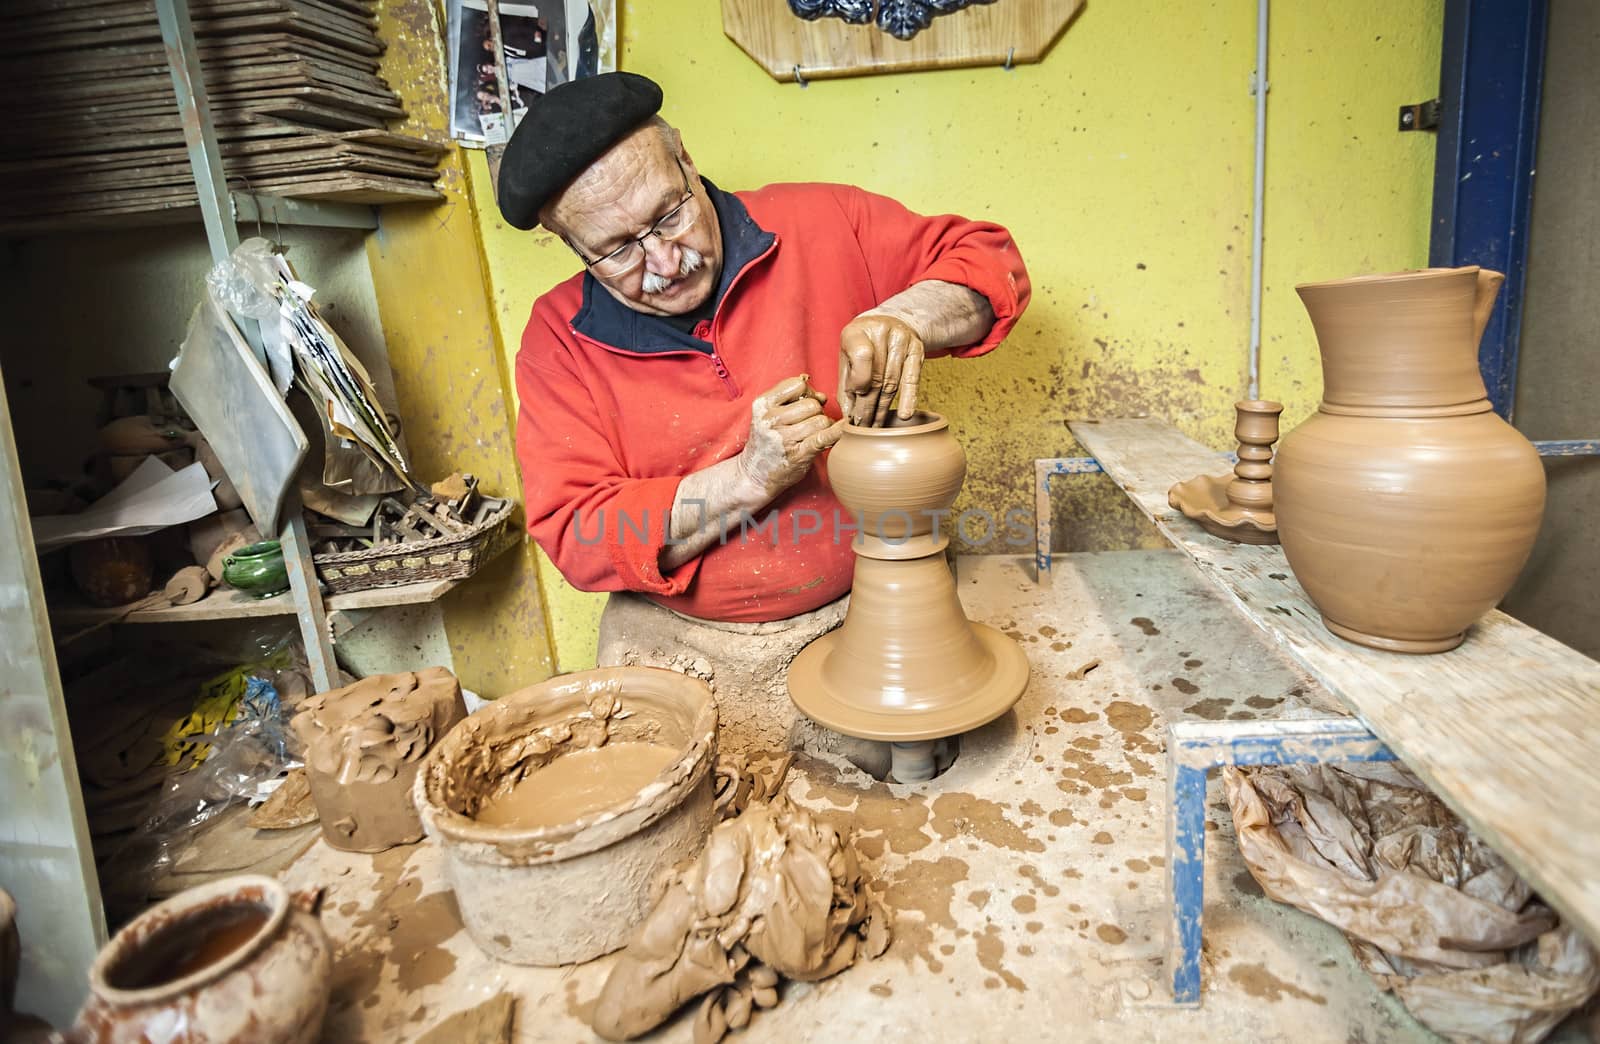 Potter working in workshop a ceramic piece typical of Bailen, Jaen province, Andalucia, Spain